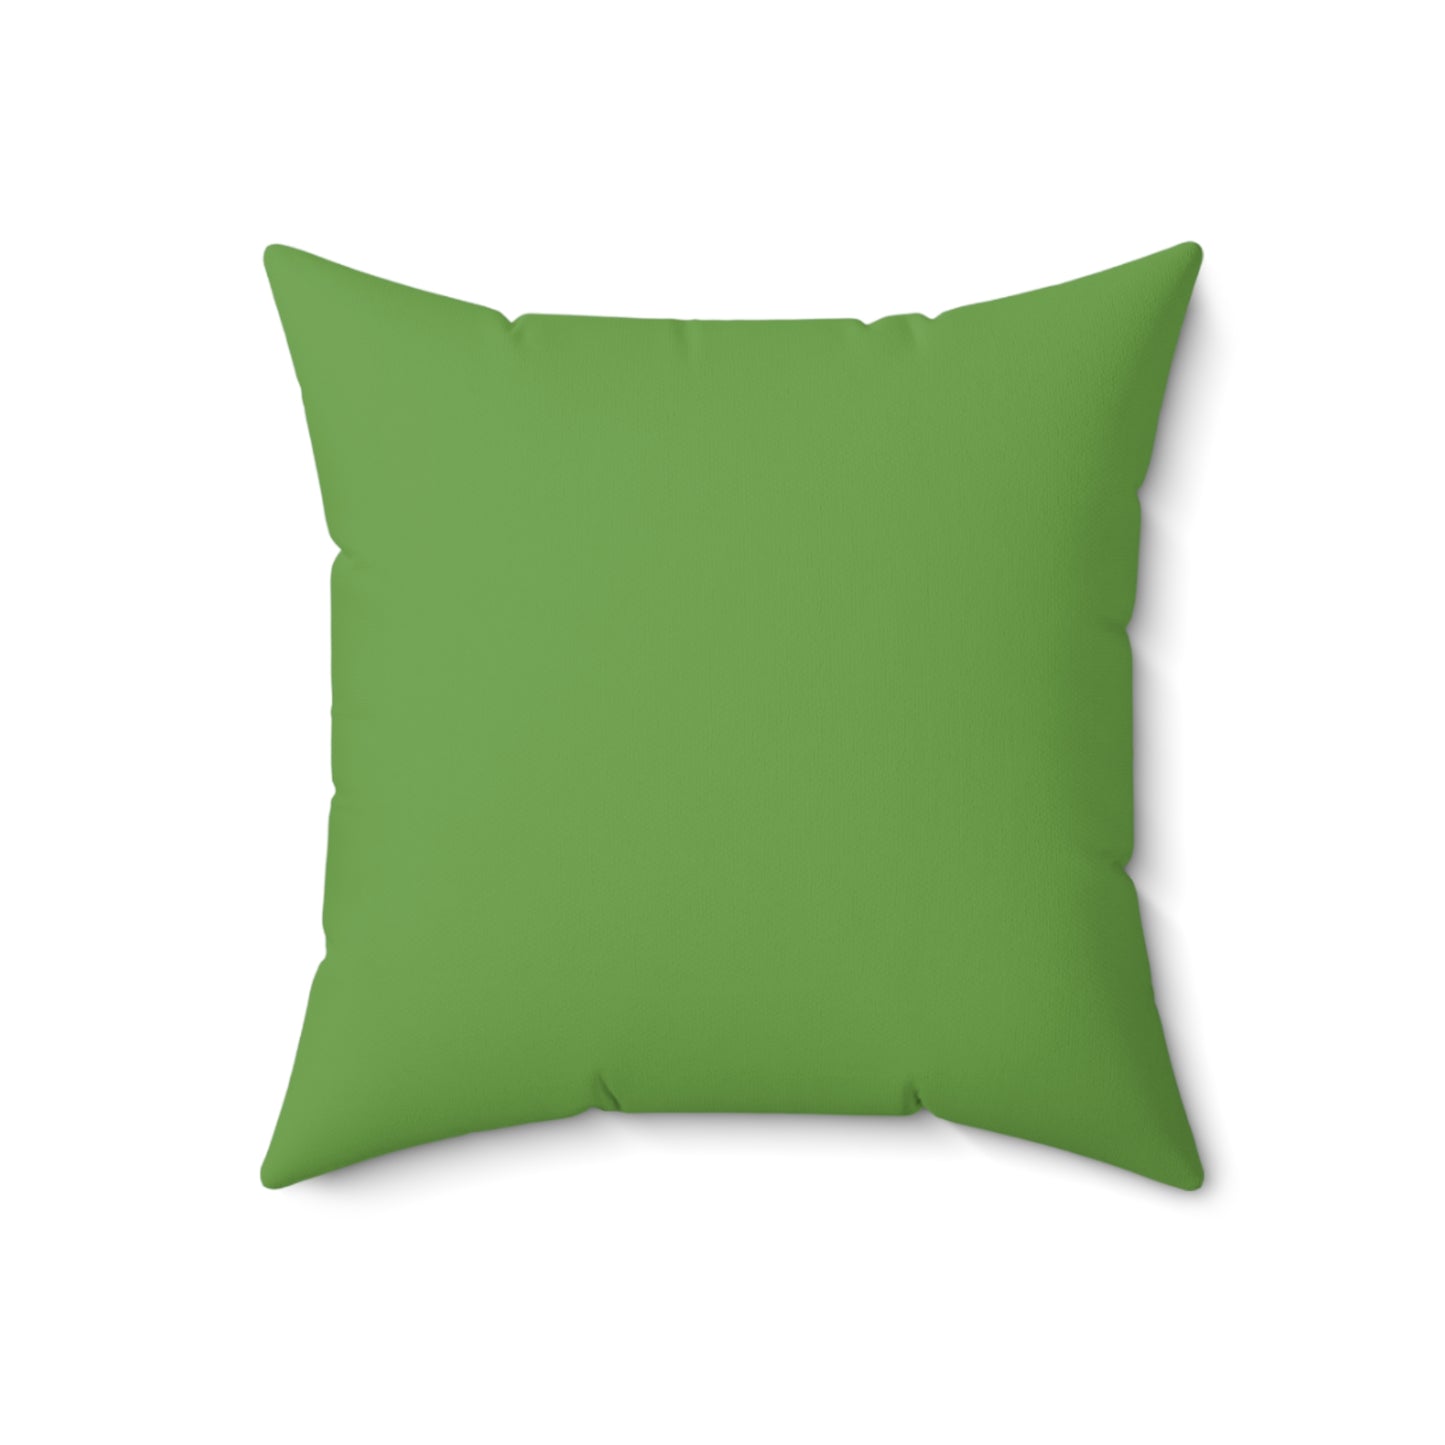 Realize your Balance Square Pillow